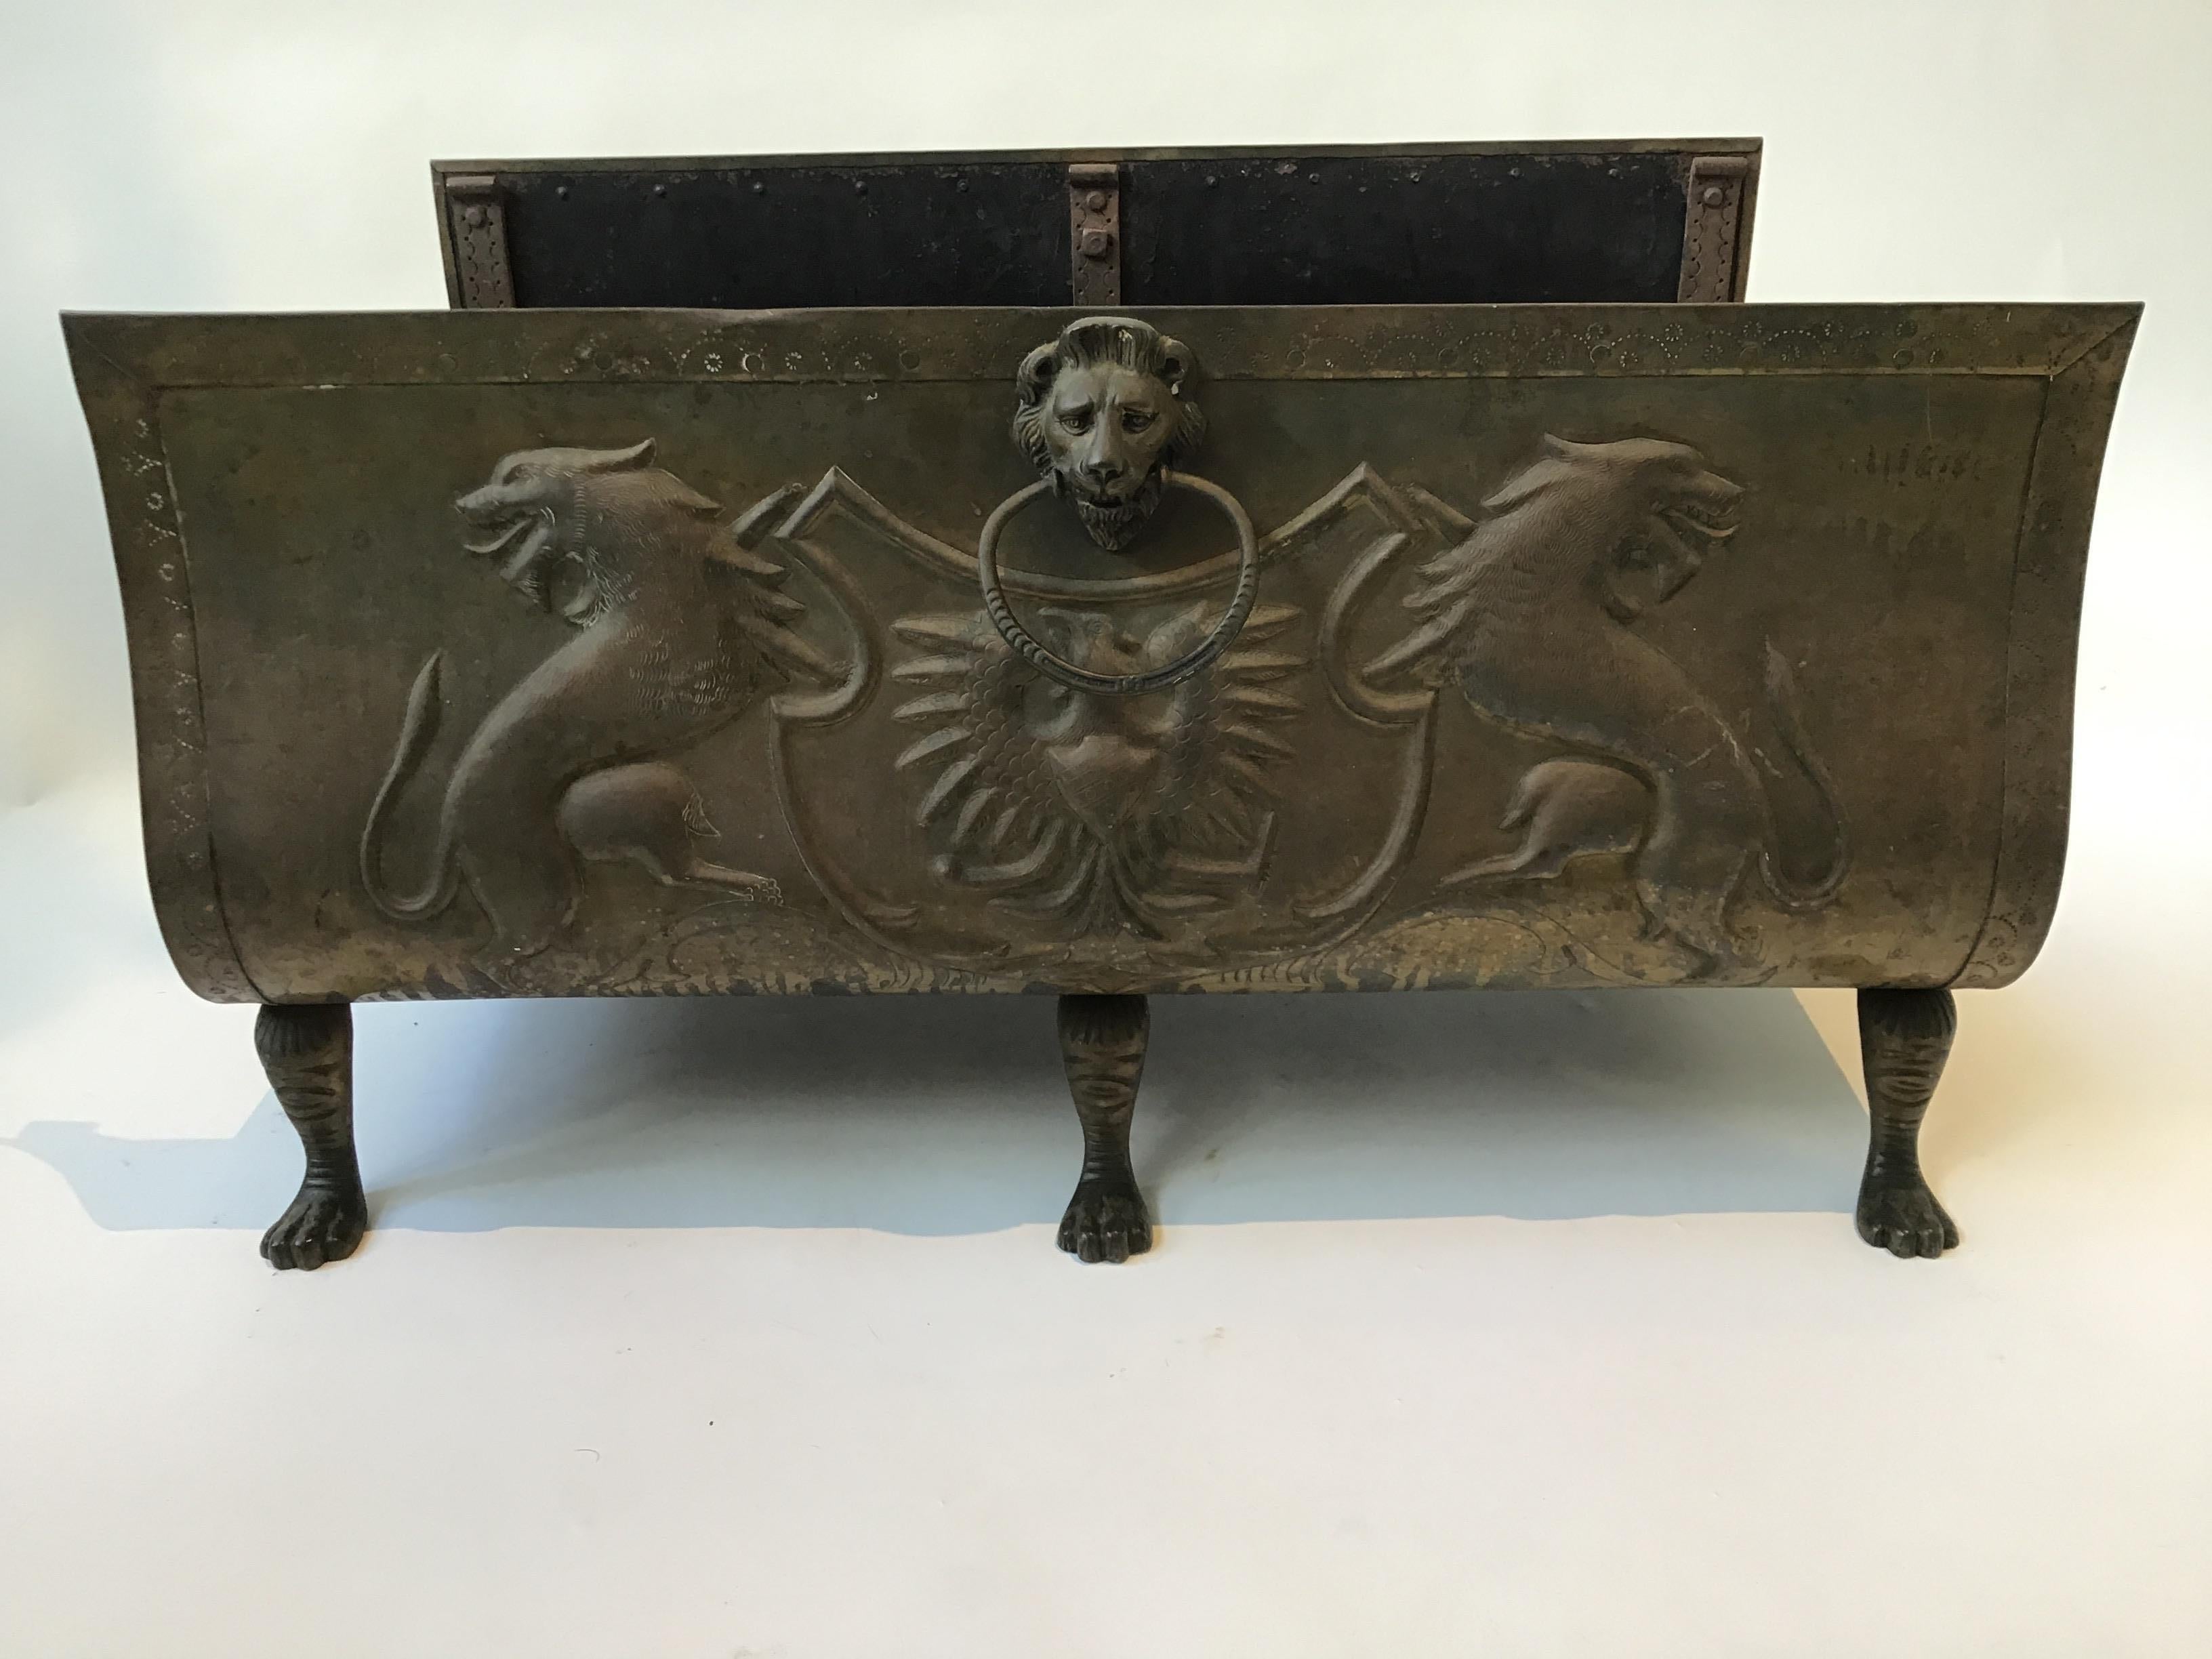 1870s English Brass Large Log Holder For Fireplace 1